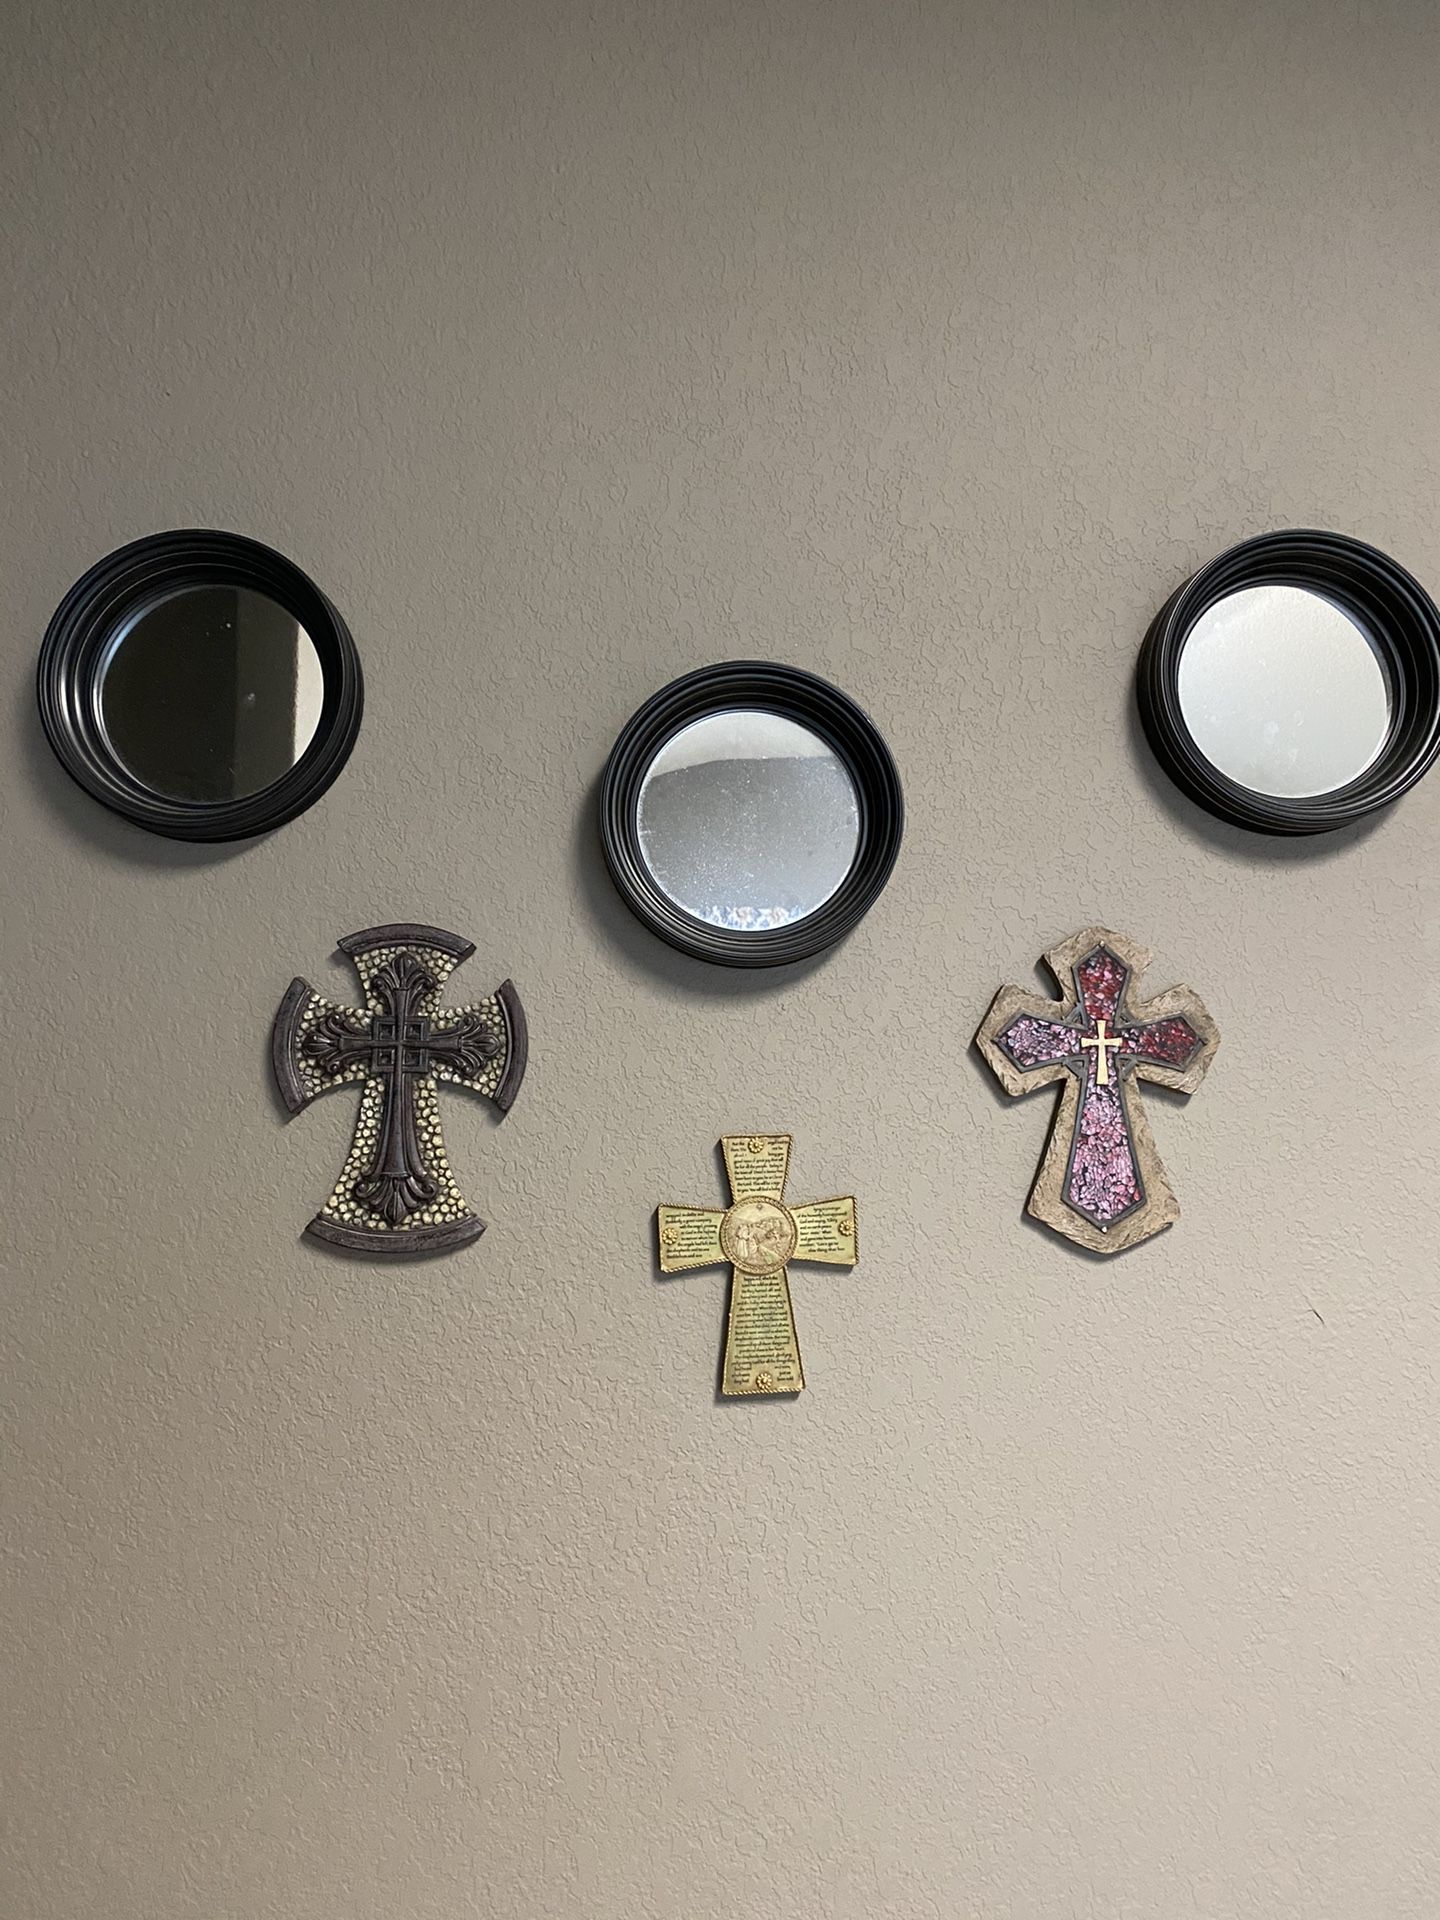 Wall decor crosses and round mirrors all for $15